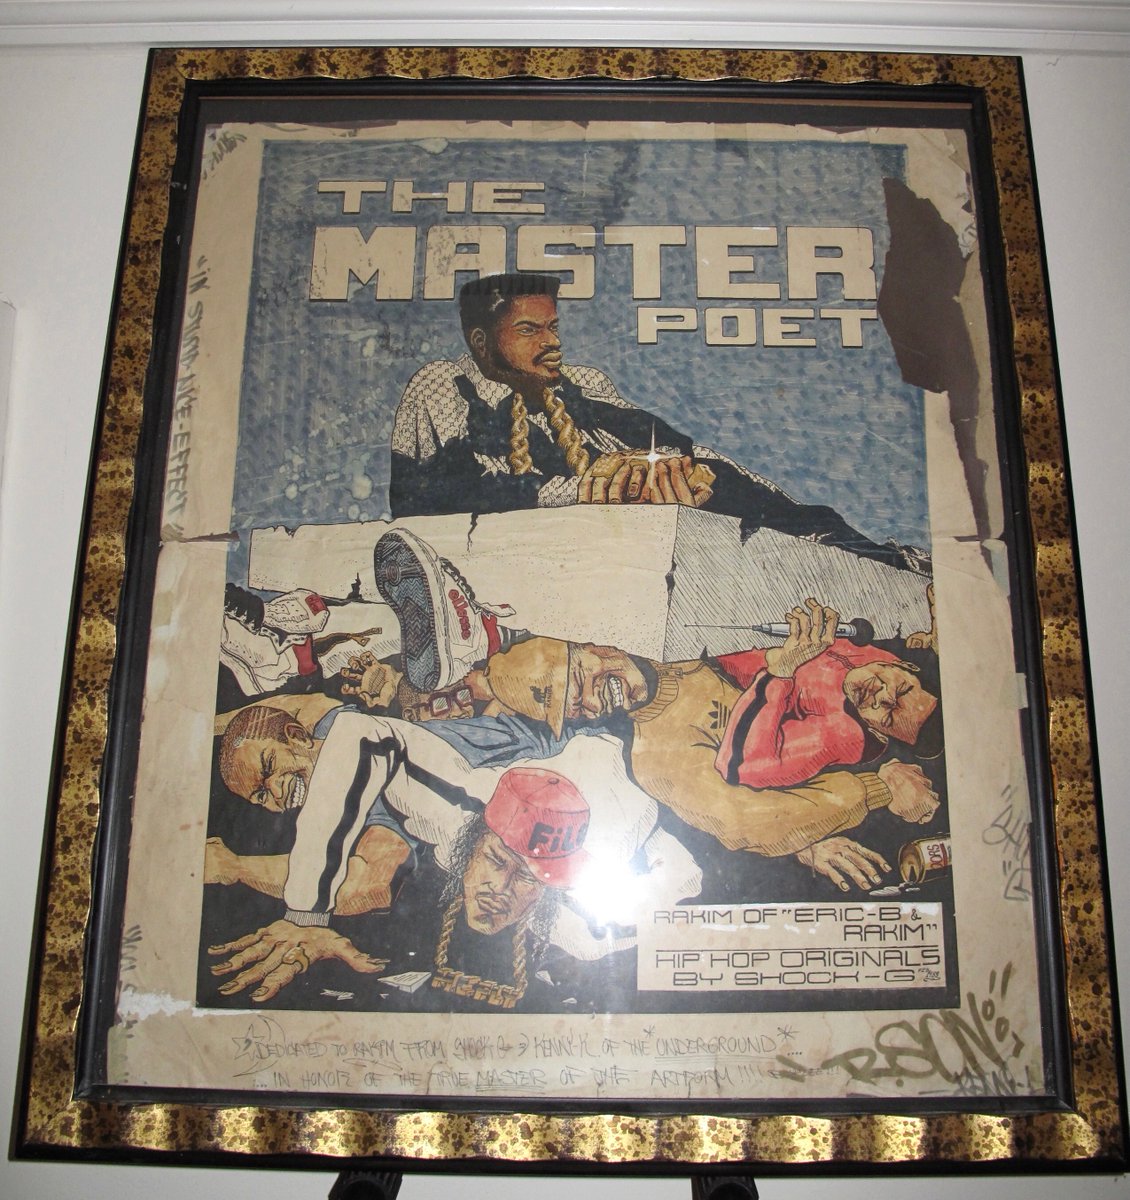 I once went to Rakim’s house, and on his studio wall, he had an amazing poster-sized cartoon of himself on top of a giant cement block, crushing all the other MC’s beneath it. At the top, it said “The Master Poet.” When I looked closer, I couldn’t believe my eyes.  #ShockG